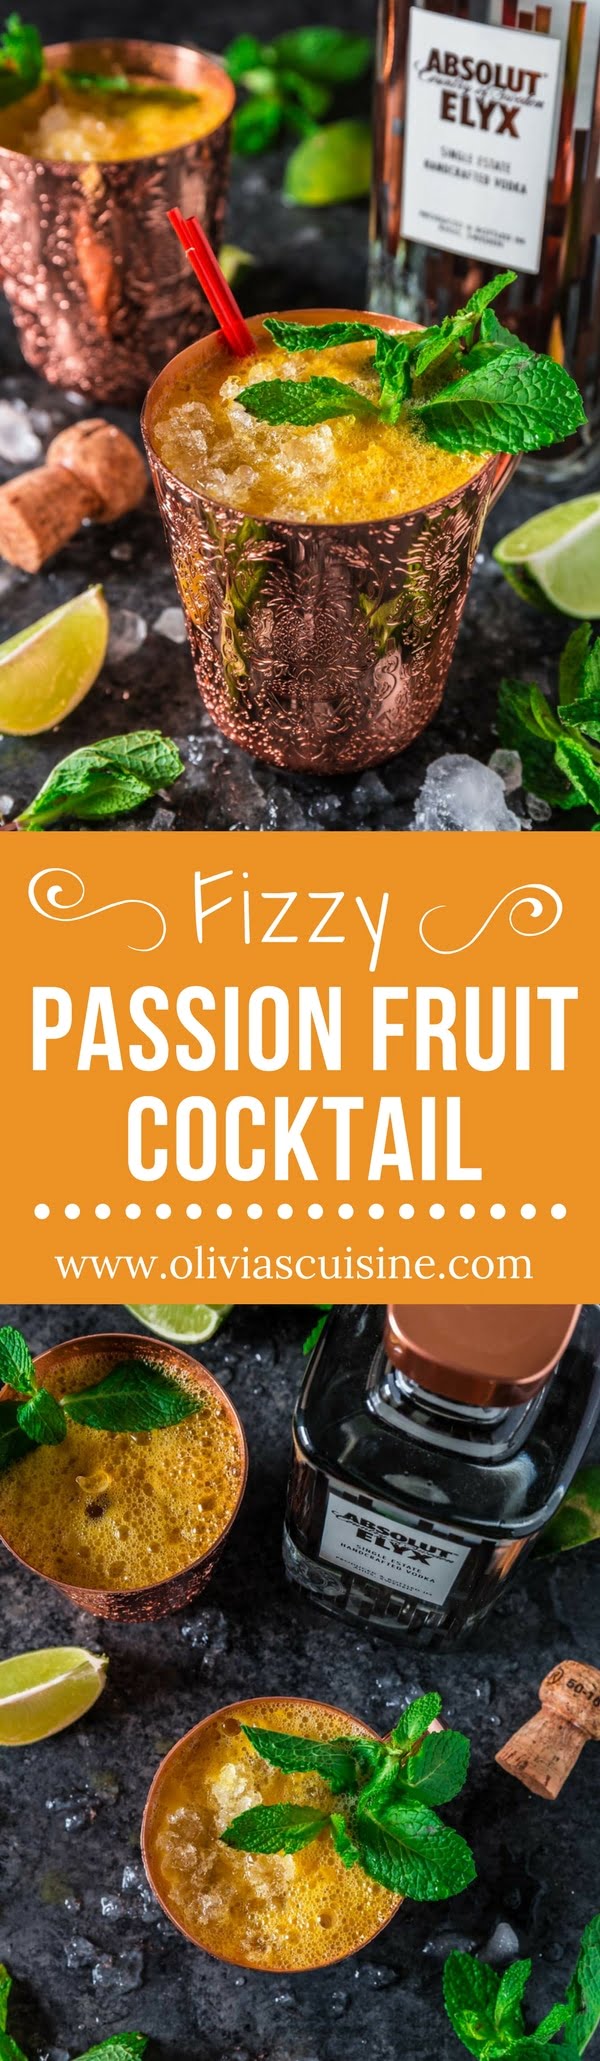 Fizzy Passion Fruit Cocktail | www.oliviascuisine.com | This holiday season, ditch the same old eggnog for a delicious and tropical premium vodka cocktail. Easy, refreshing and oh so luxurious! (Recipe and food photography by @oliviascuisine.)